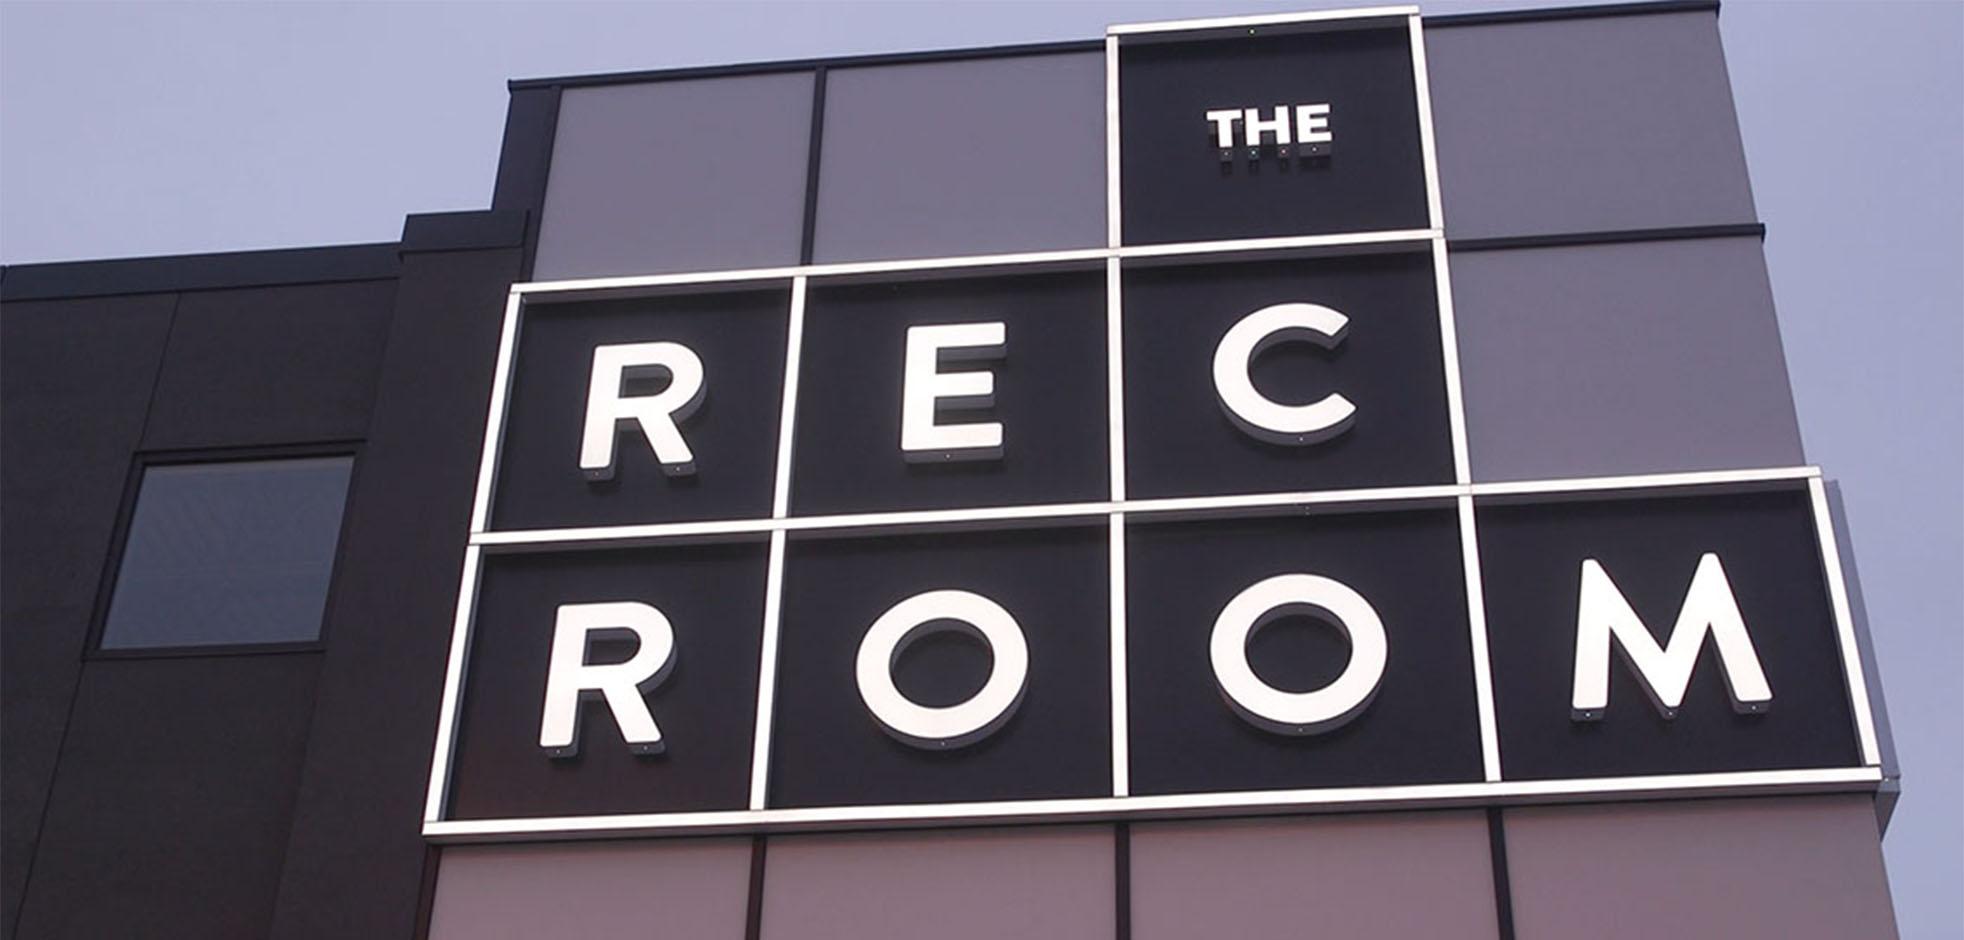 Outdoor exterior view of the Rec Room signage located at CF Masonville Place